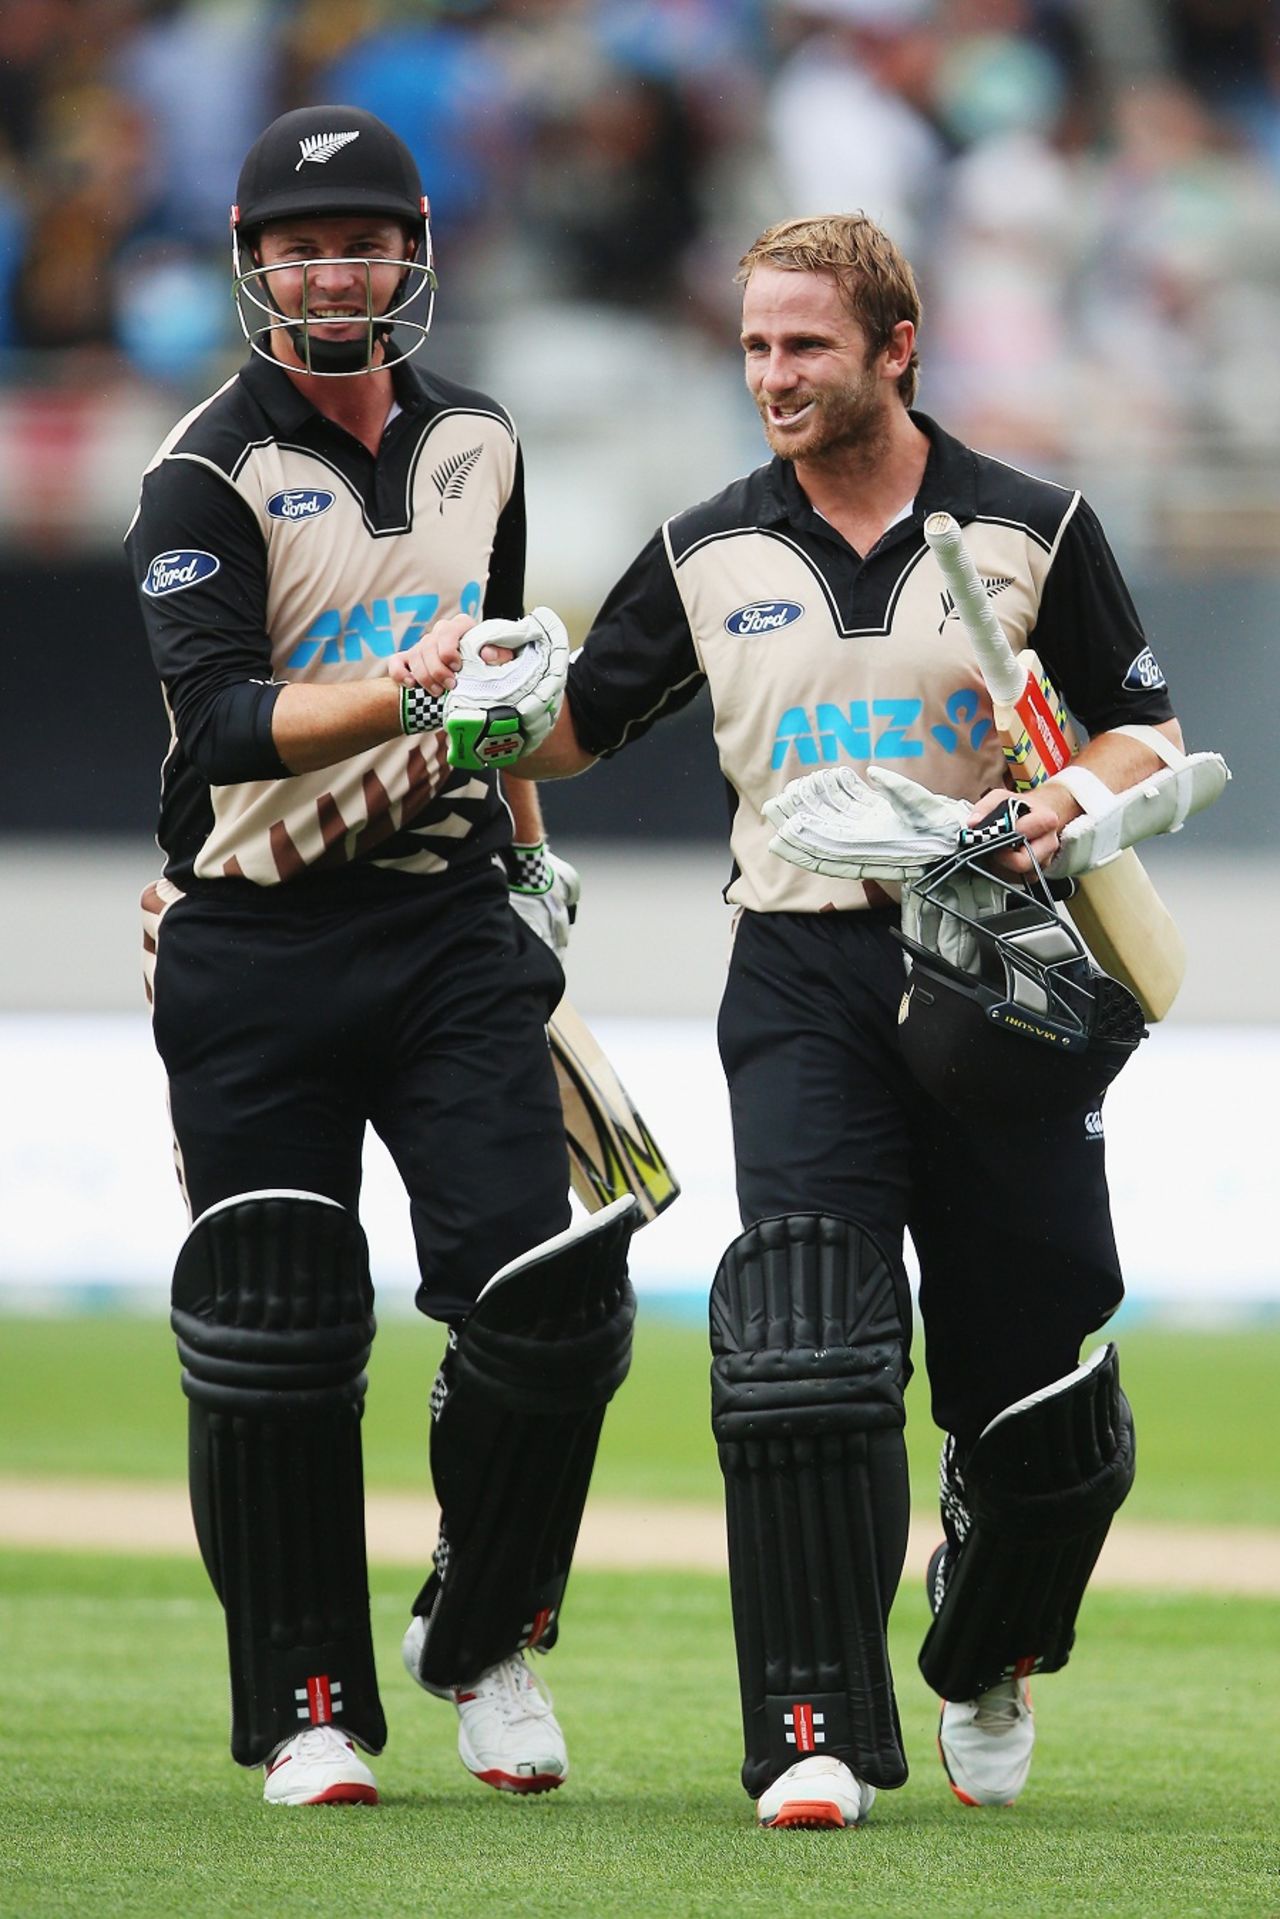 Kane Williamson and Colin Munro walk off after sealing a nine-wicket win for New Zealand, New Zealand v Sri Lanka, 2nd T20I, Auckland, January 10, 2016